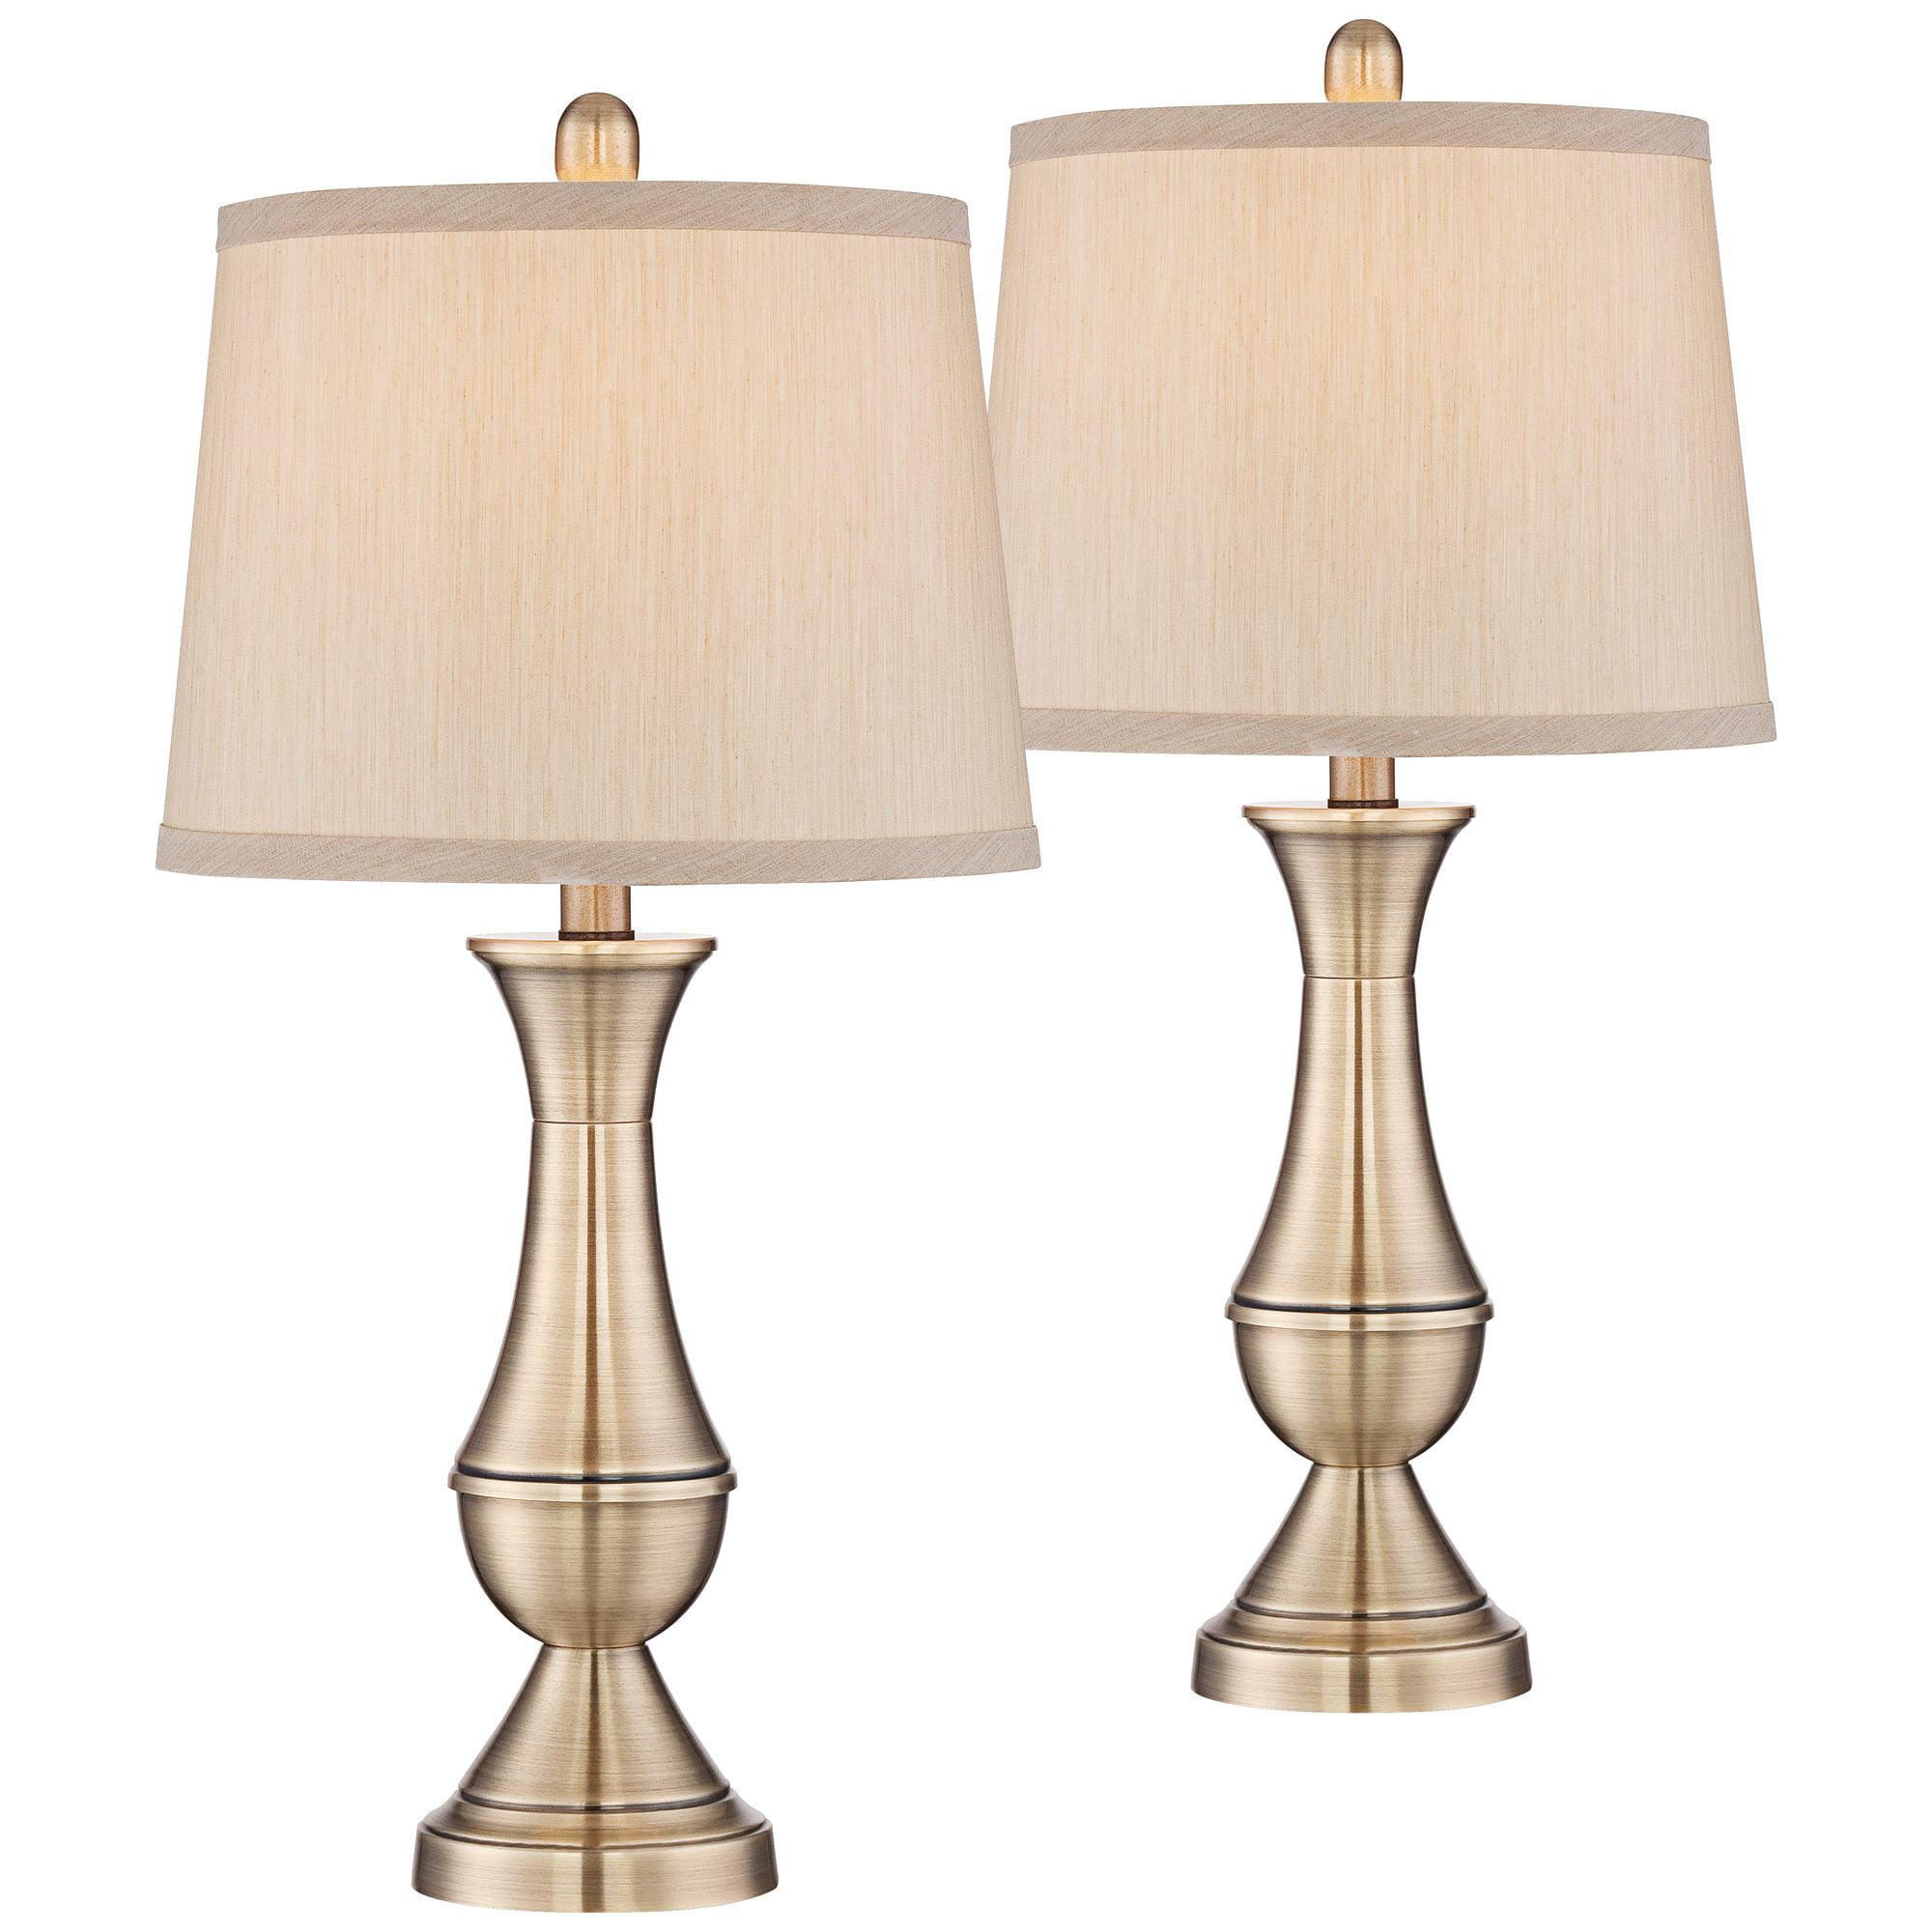 Regency Hill Traditional Table Lamps Set of 2 Antique Brass Metal Beige